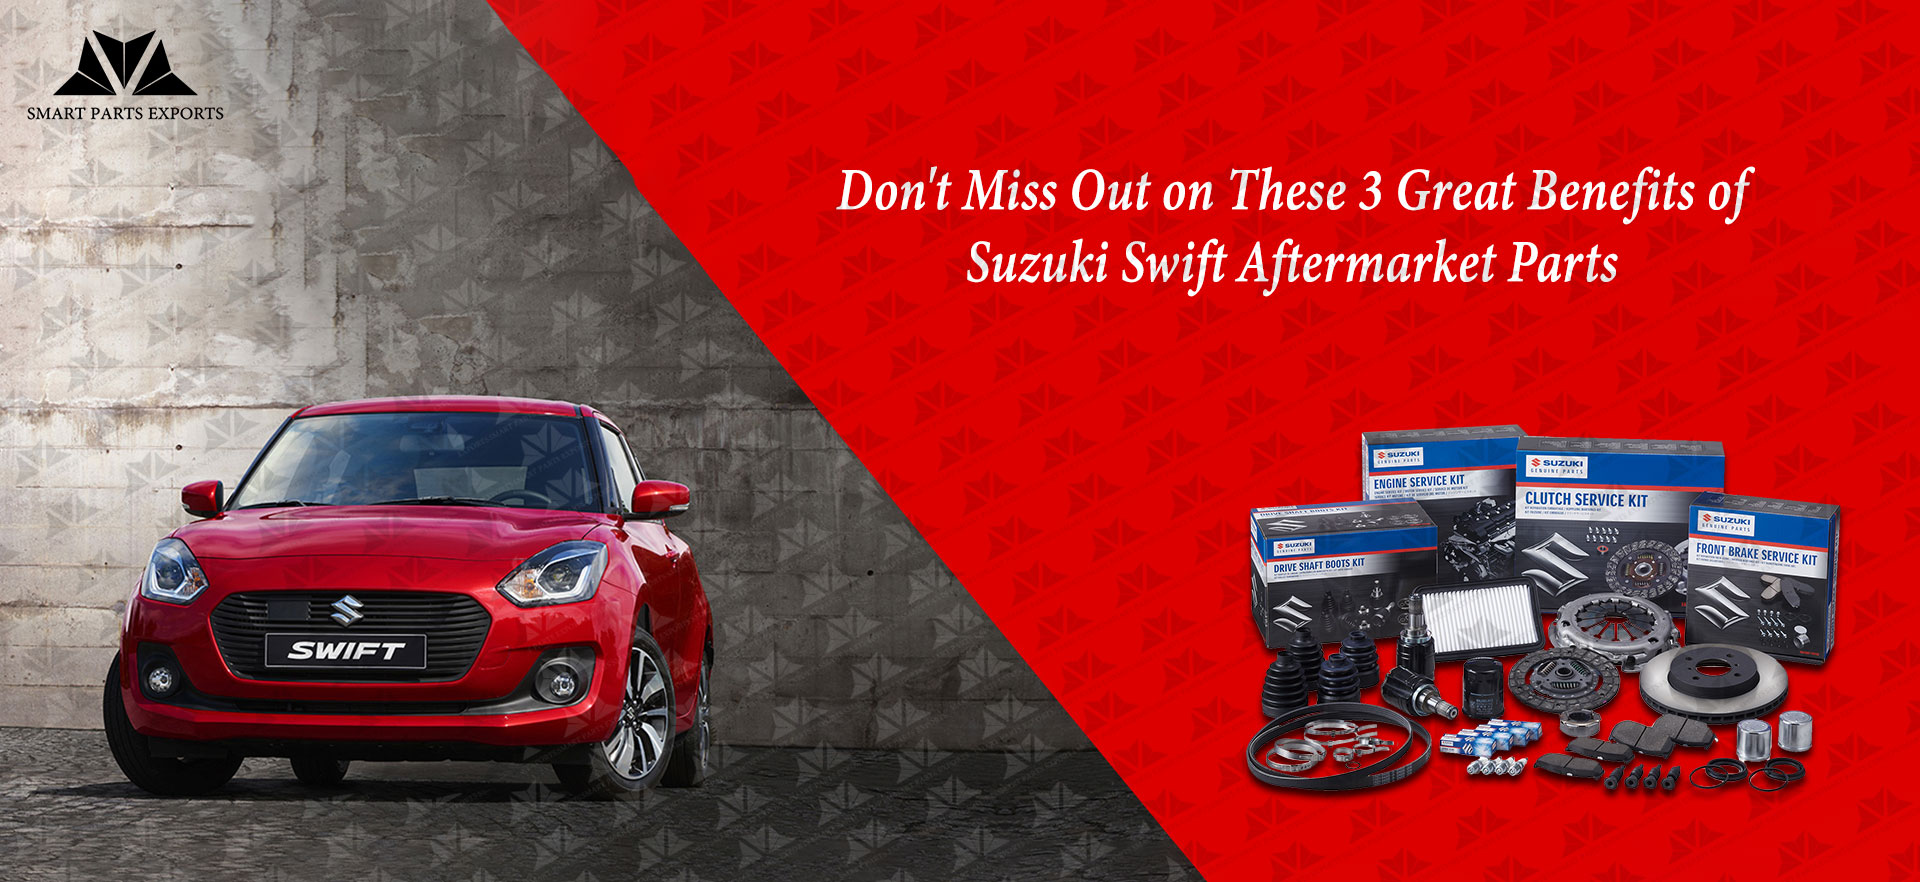 Don't Miss Out on These 3 Great Benefits of Suzuki Swift Aftermarket Parts